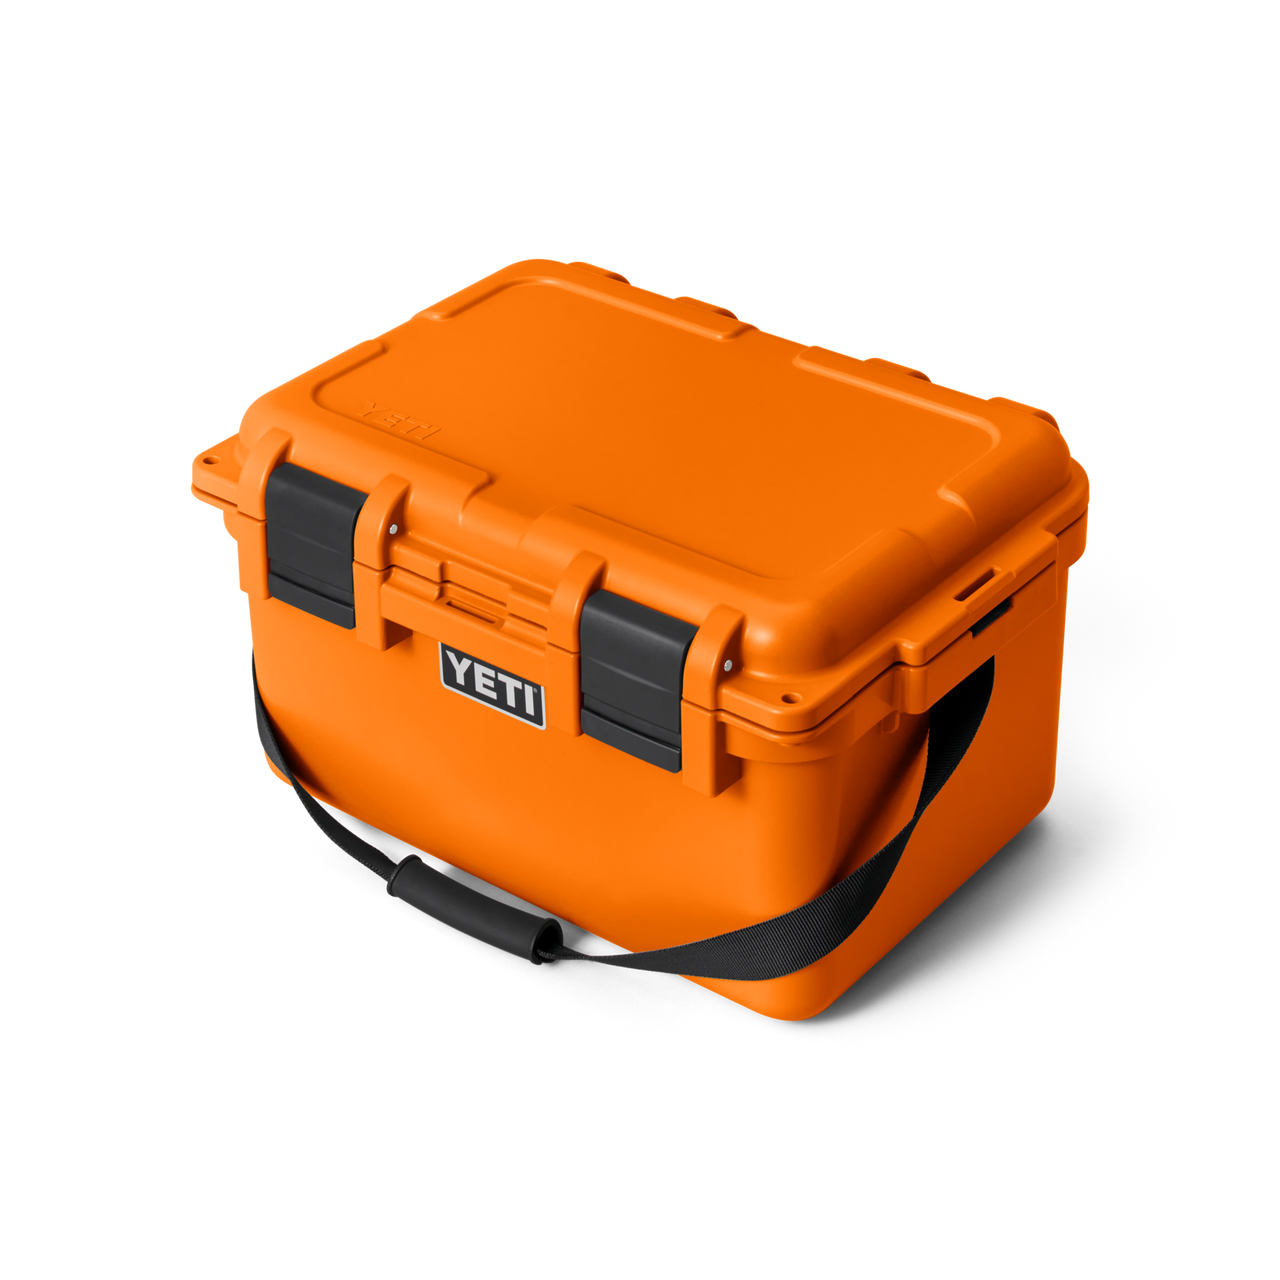 YETI Introduces Two New GoBox Sizes - Flylords Mag